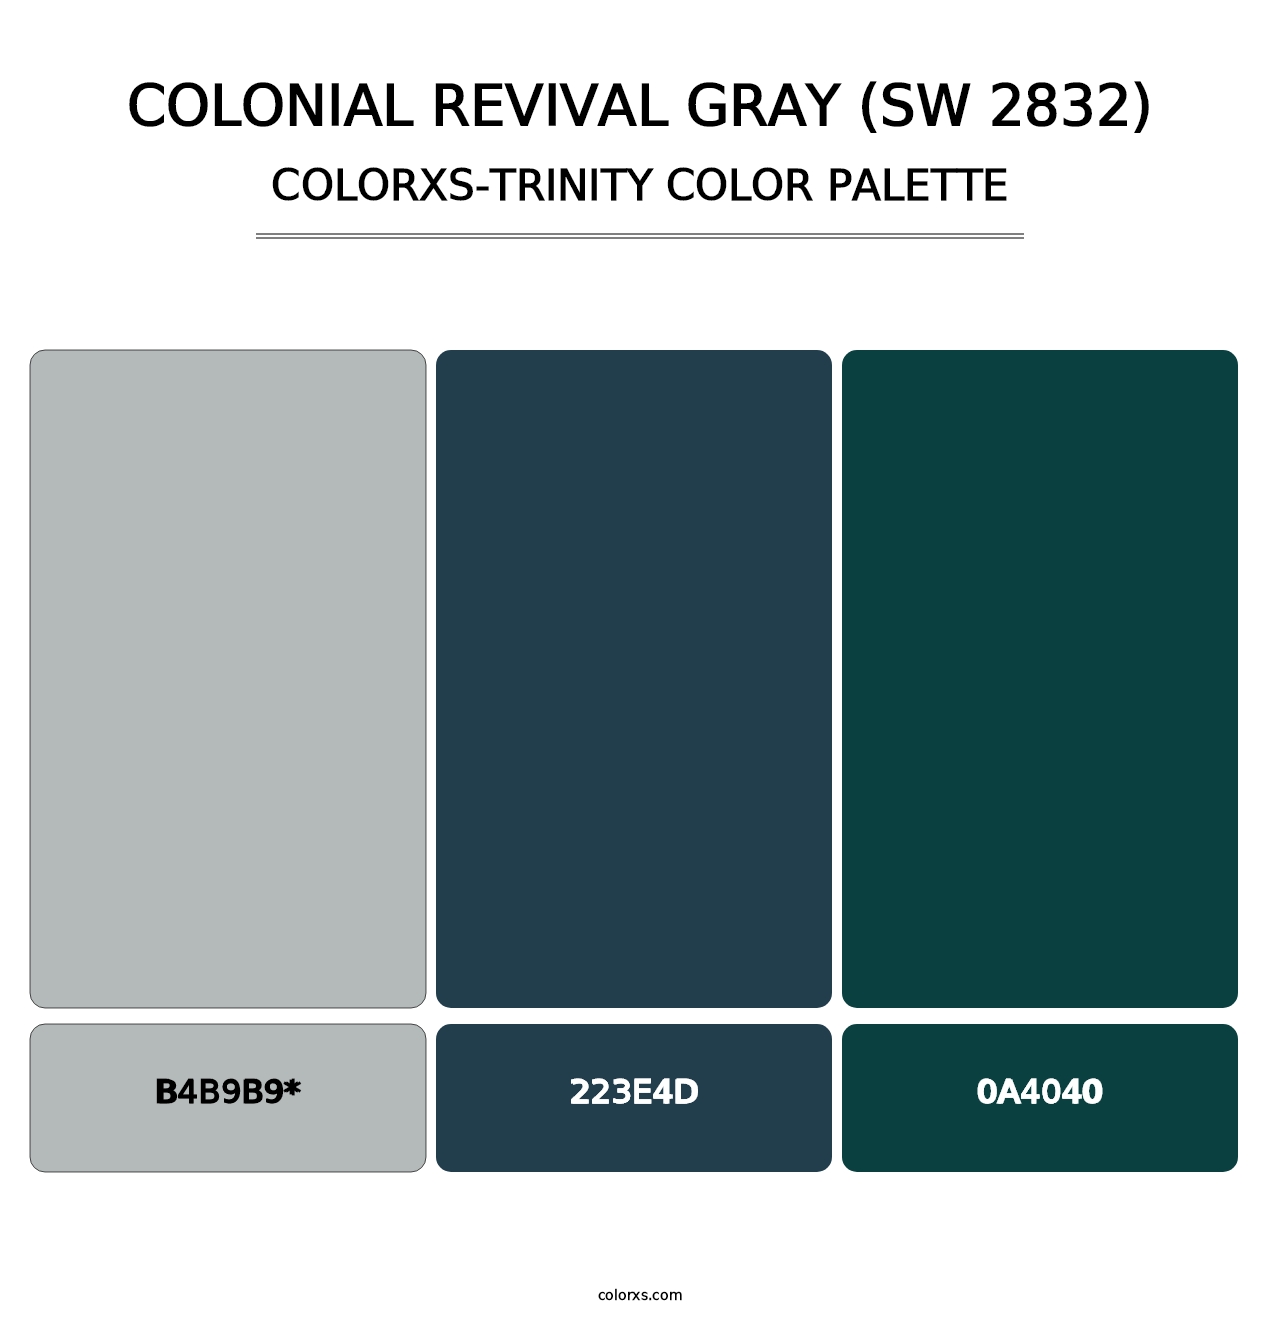 Colonial Revival Gray (SW 2832) - Colorxs Trinity Palette